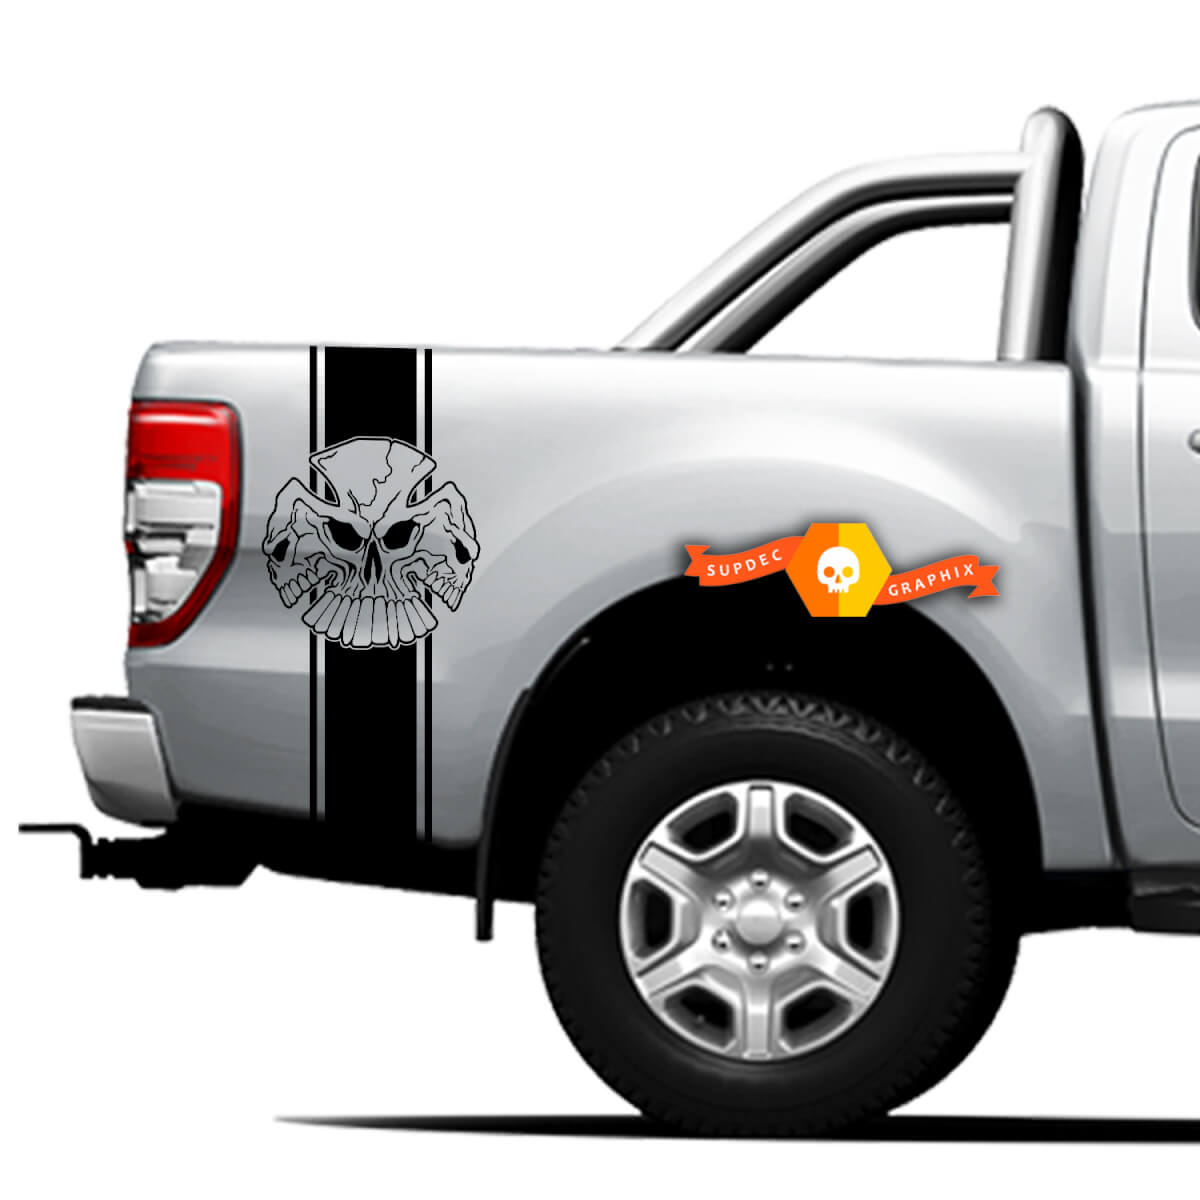 Pair Vinyl Decals Stickers Side 4x4 graphic for Ford Ranger Off Road, Triple Skull 2021 